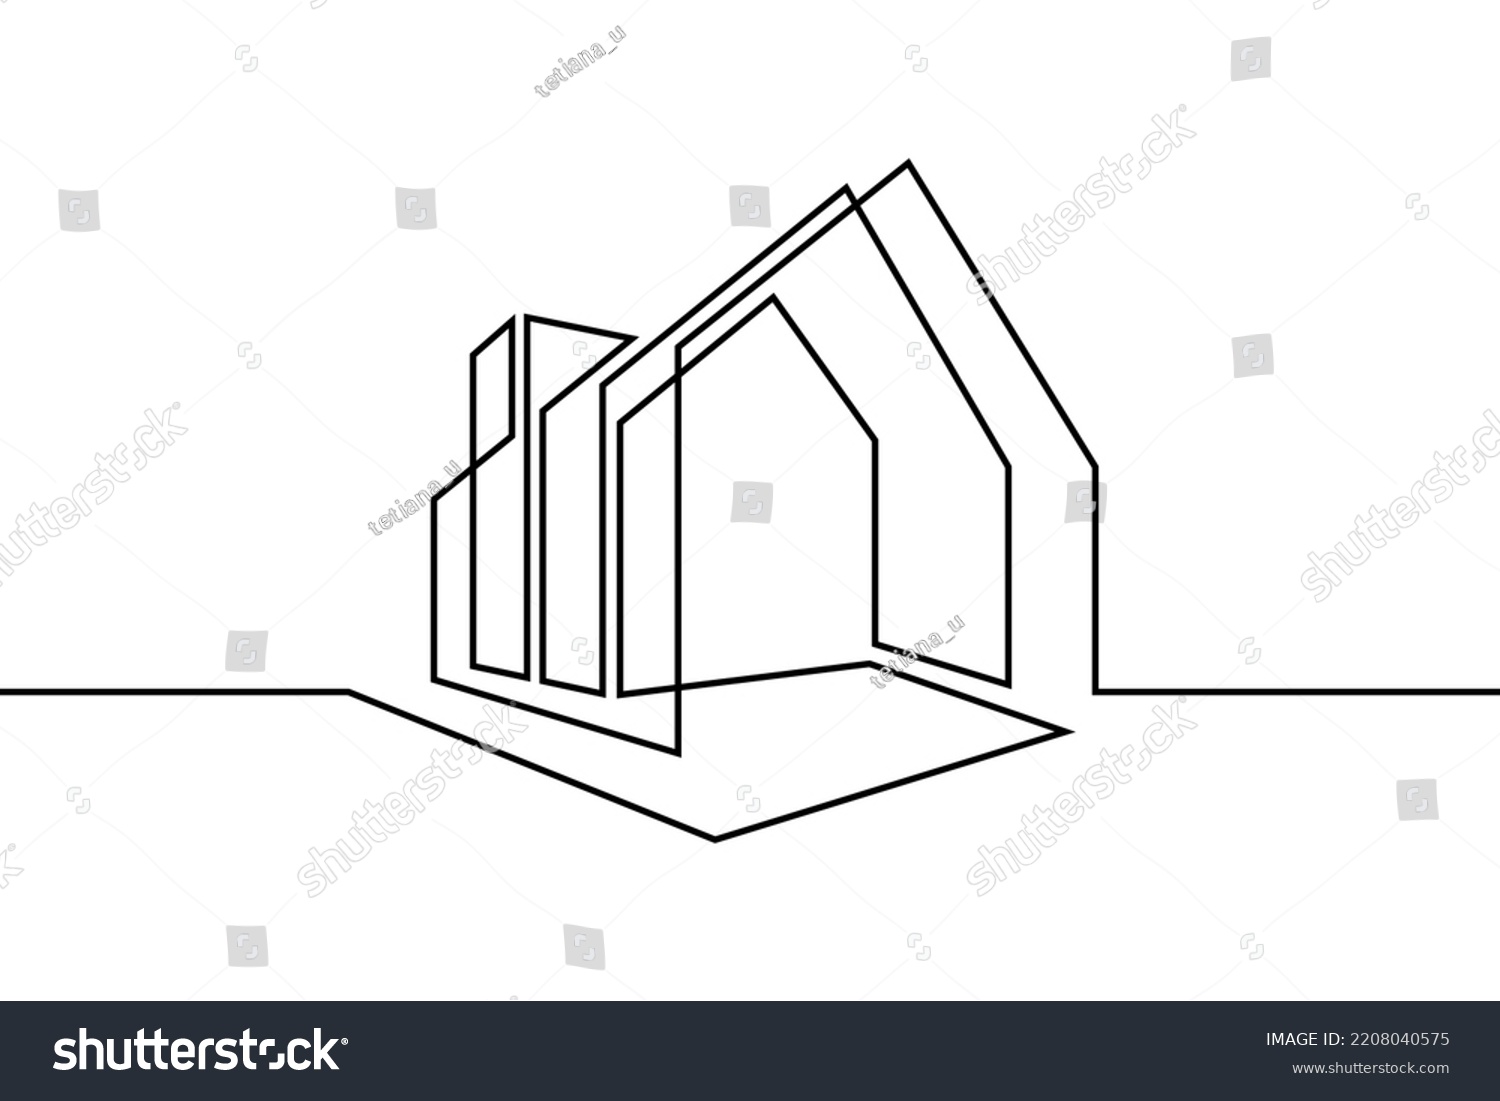 SVG of Modern house in continuous line art drawing style. Contemporary building architectural model black linear design isolated on white background. Vector illustration svg